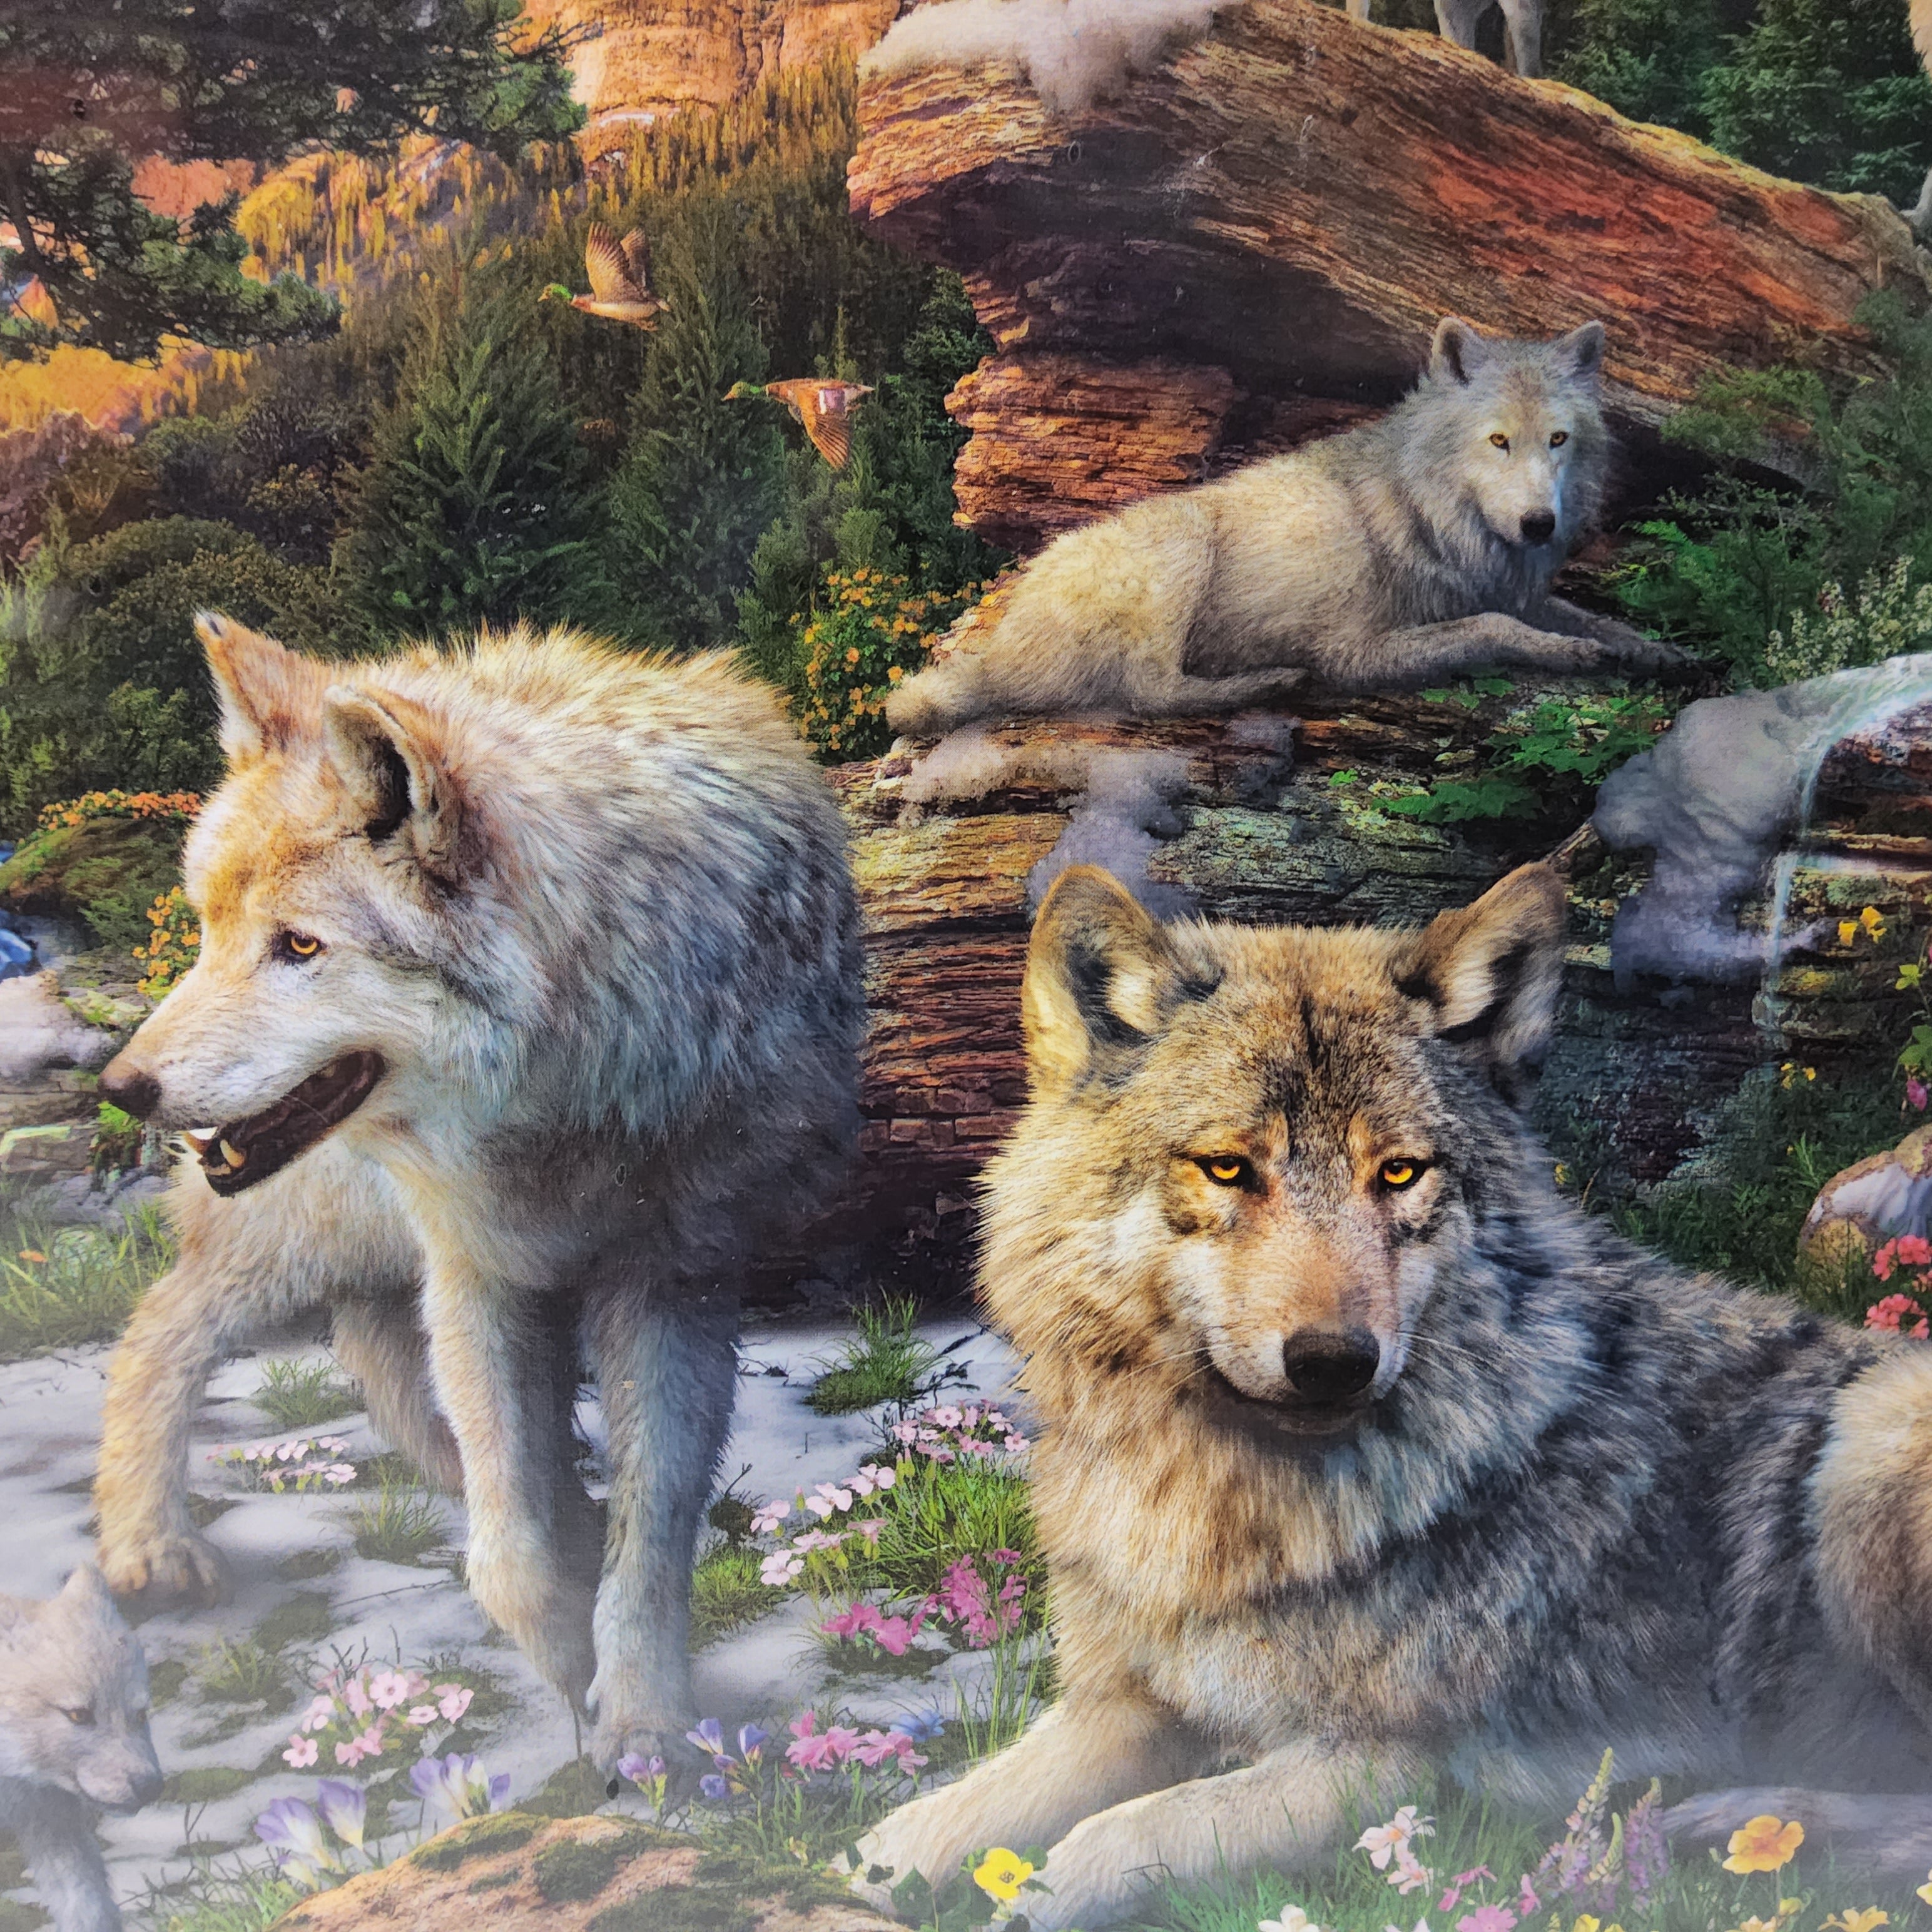 Ravensburger Puzzle - Wolves in Spring - 1500 pieces - #16598